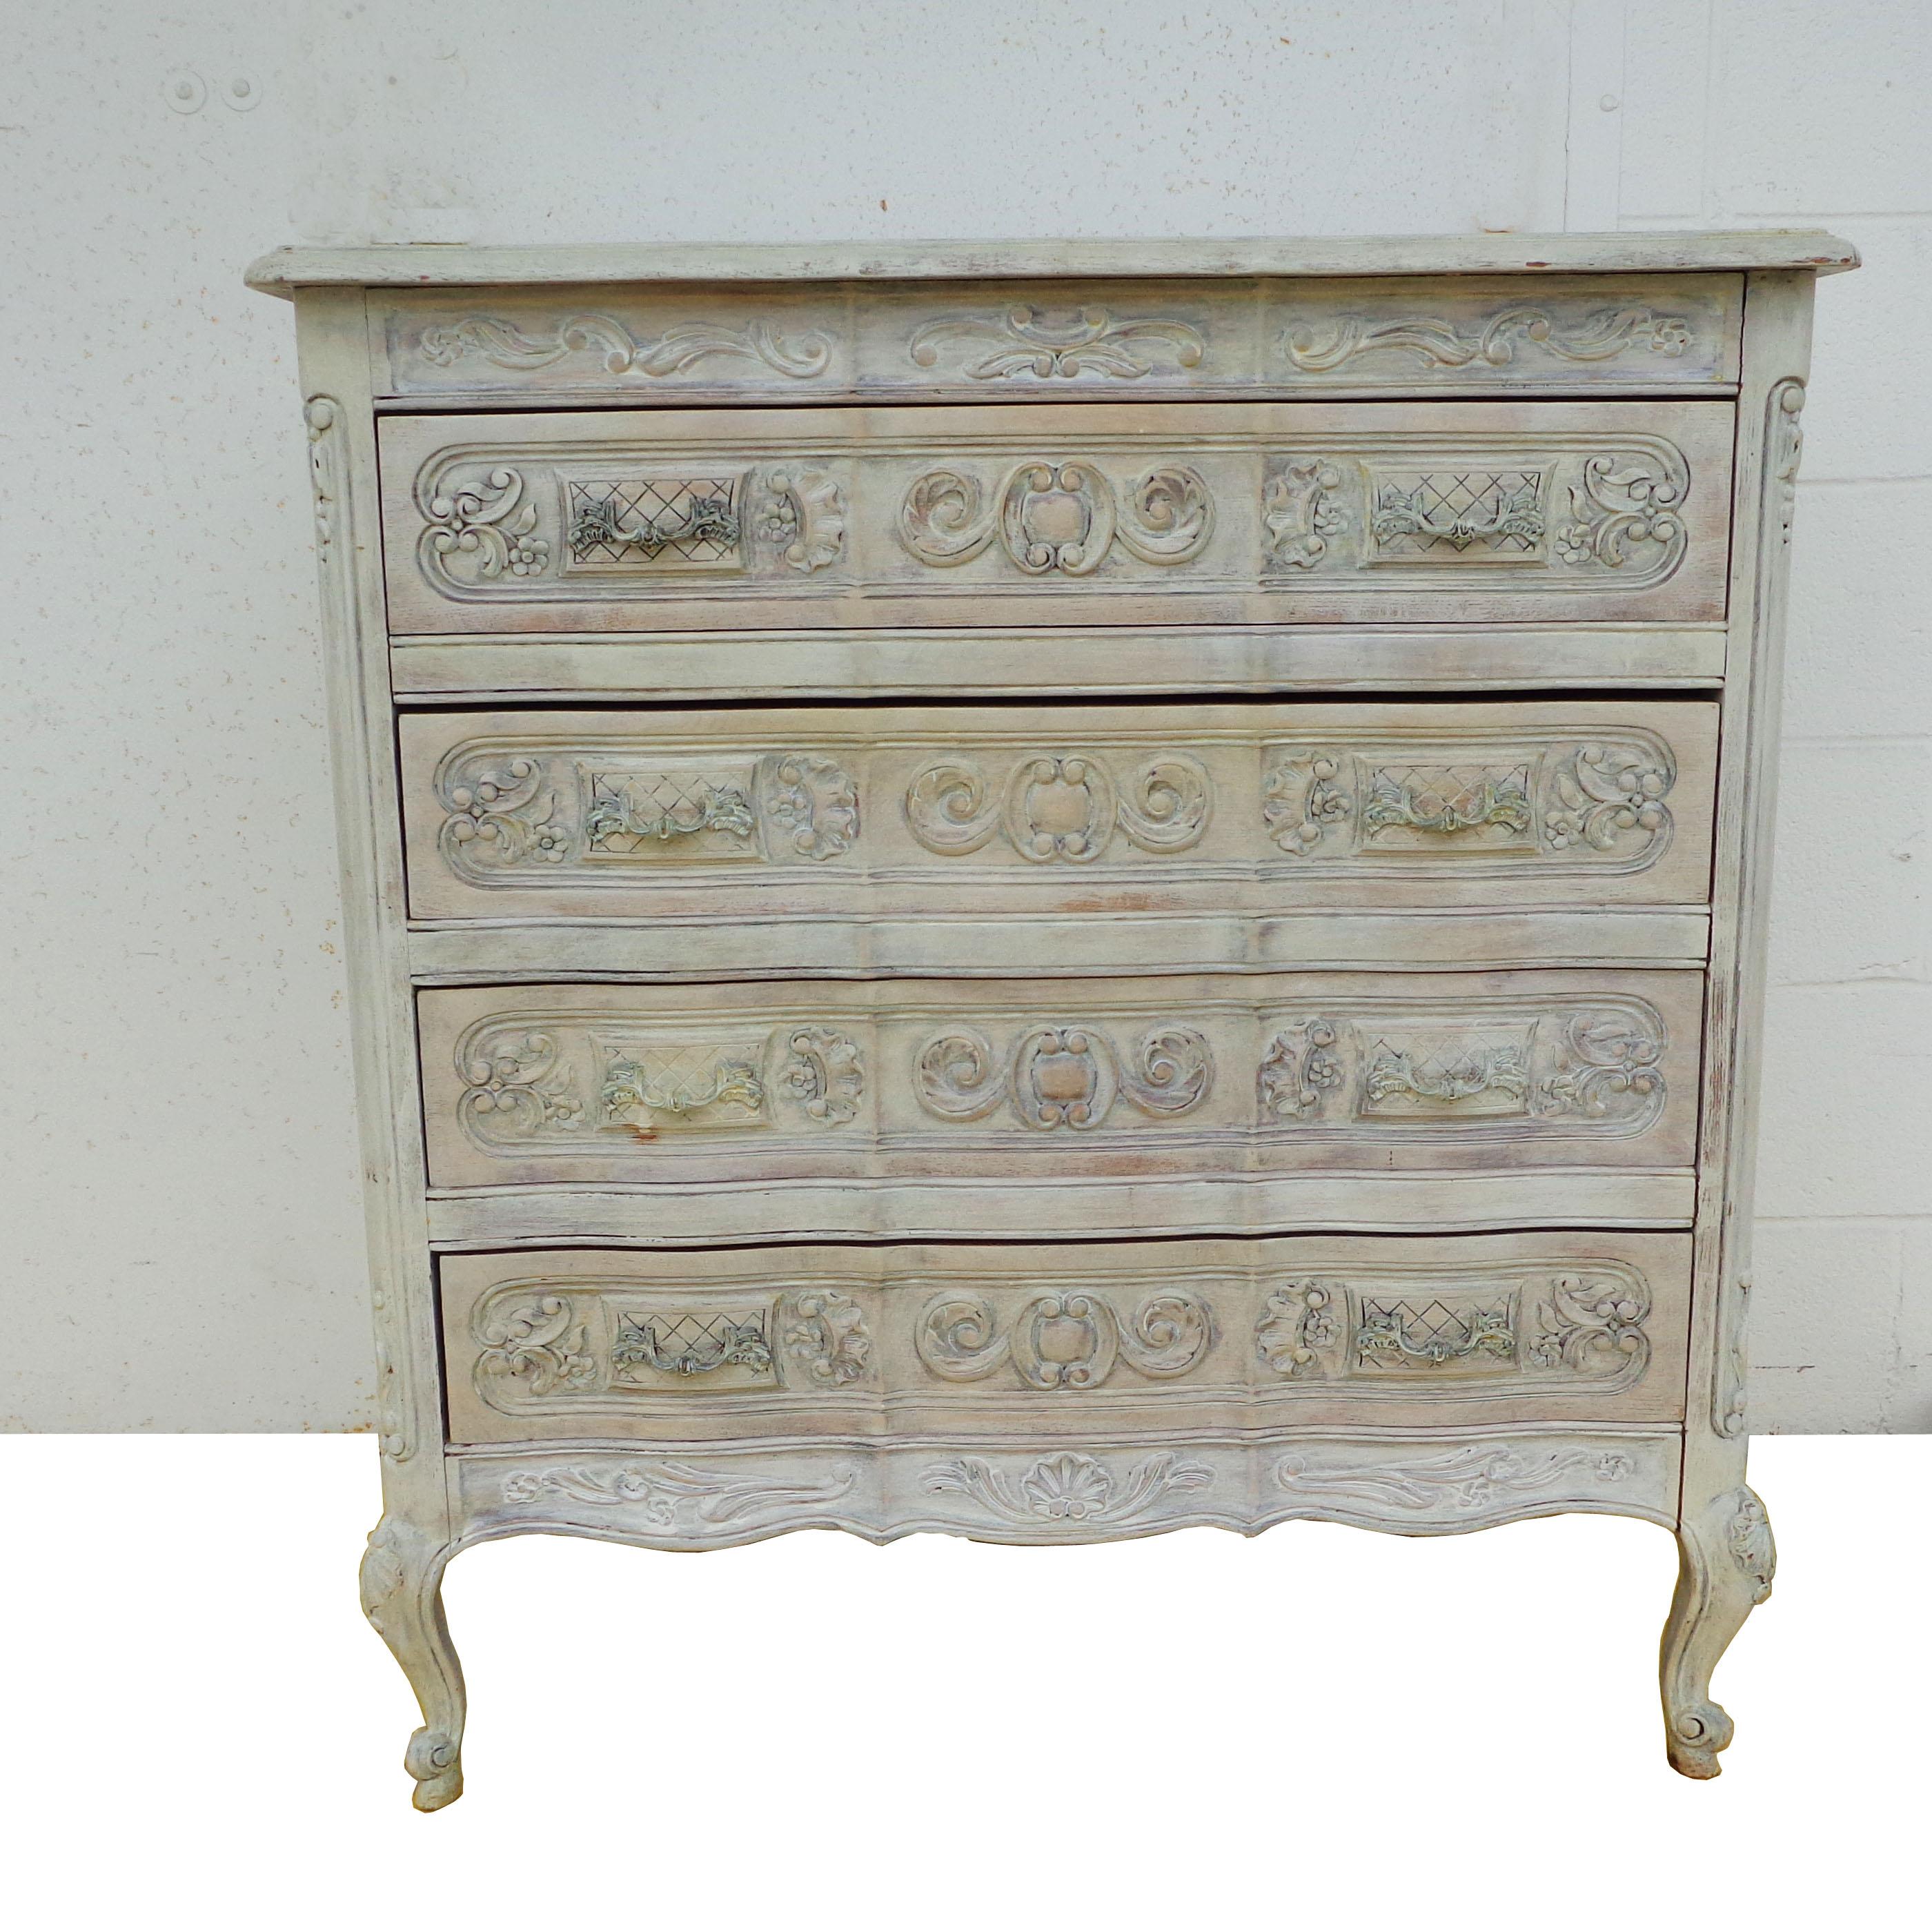 French Provincial Louis the xv Style French Provencial Painted Dresser